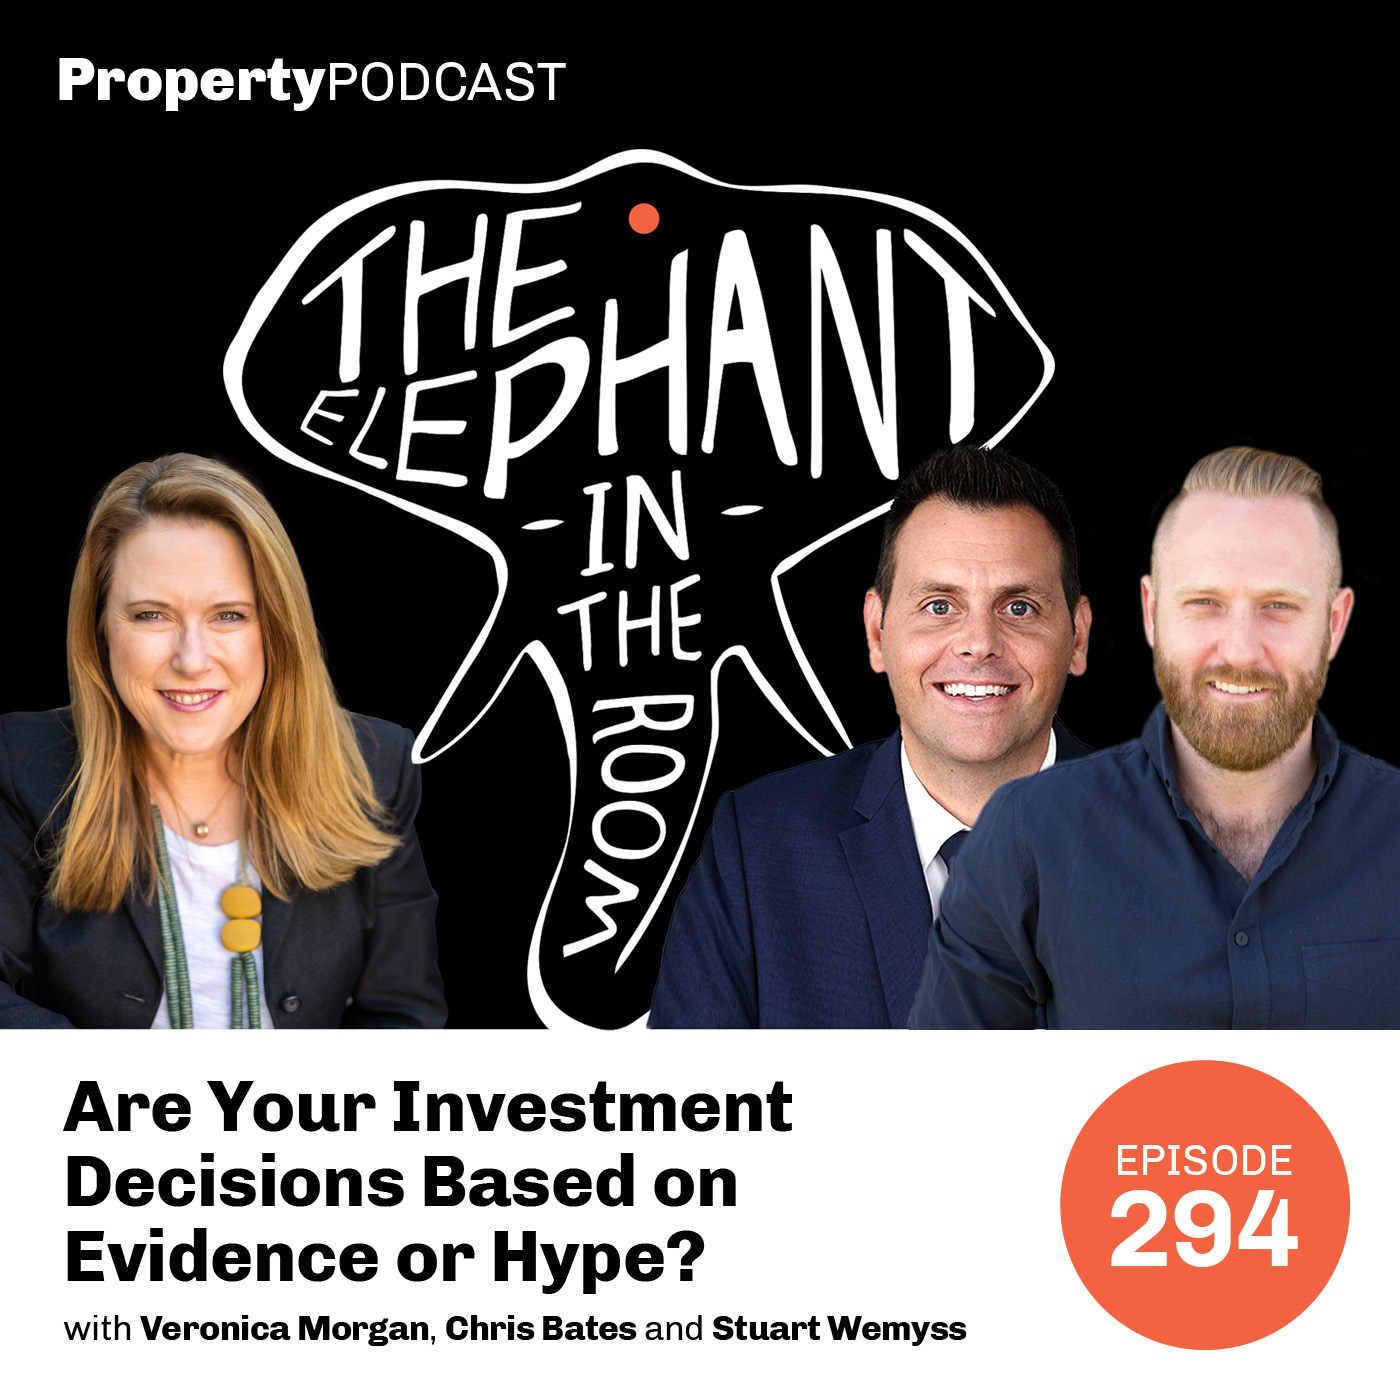 Are Your Investment Decisions Based on Evidence or Hype?